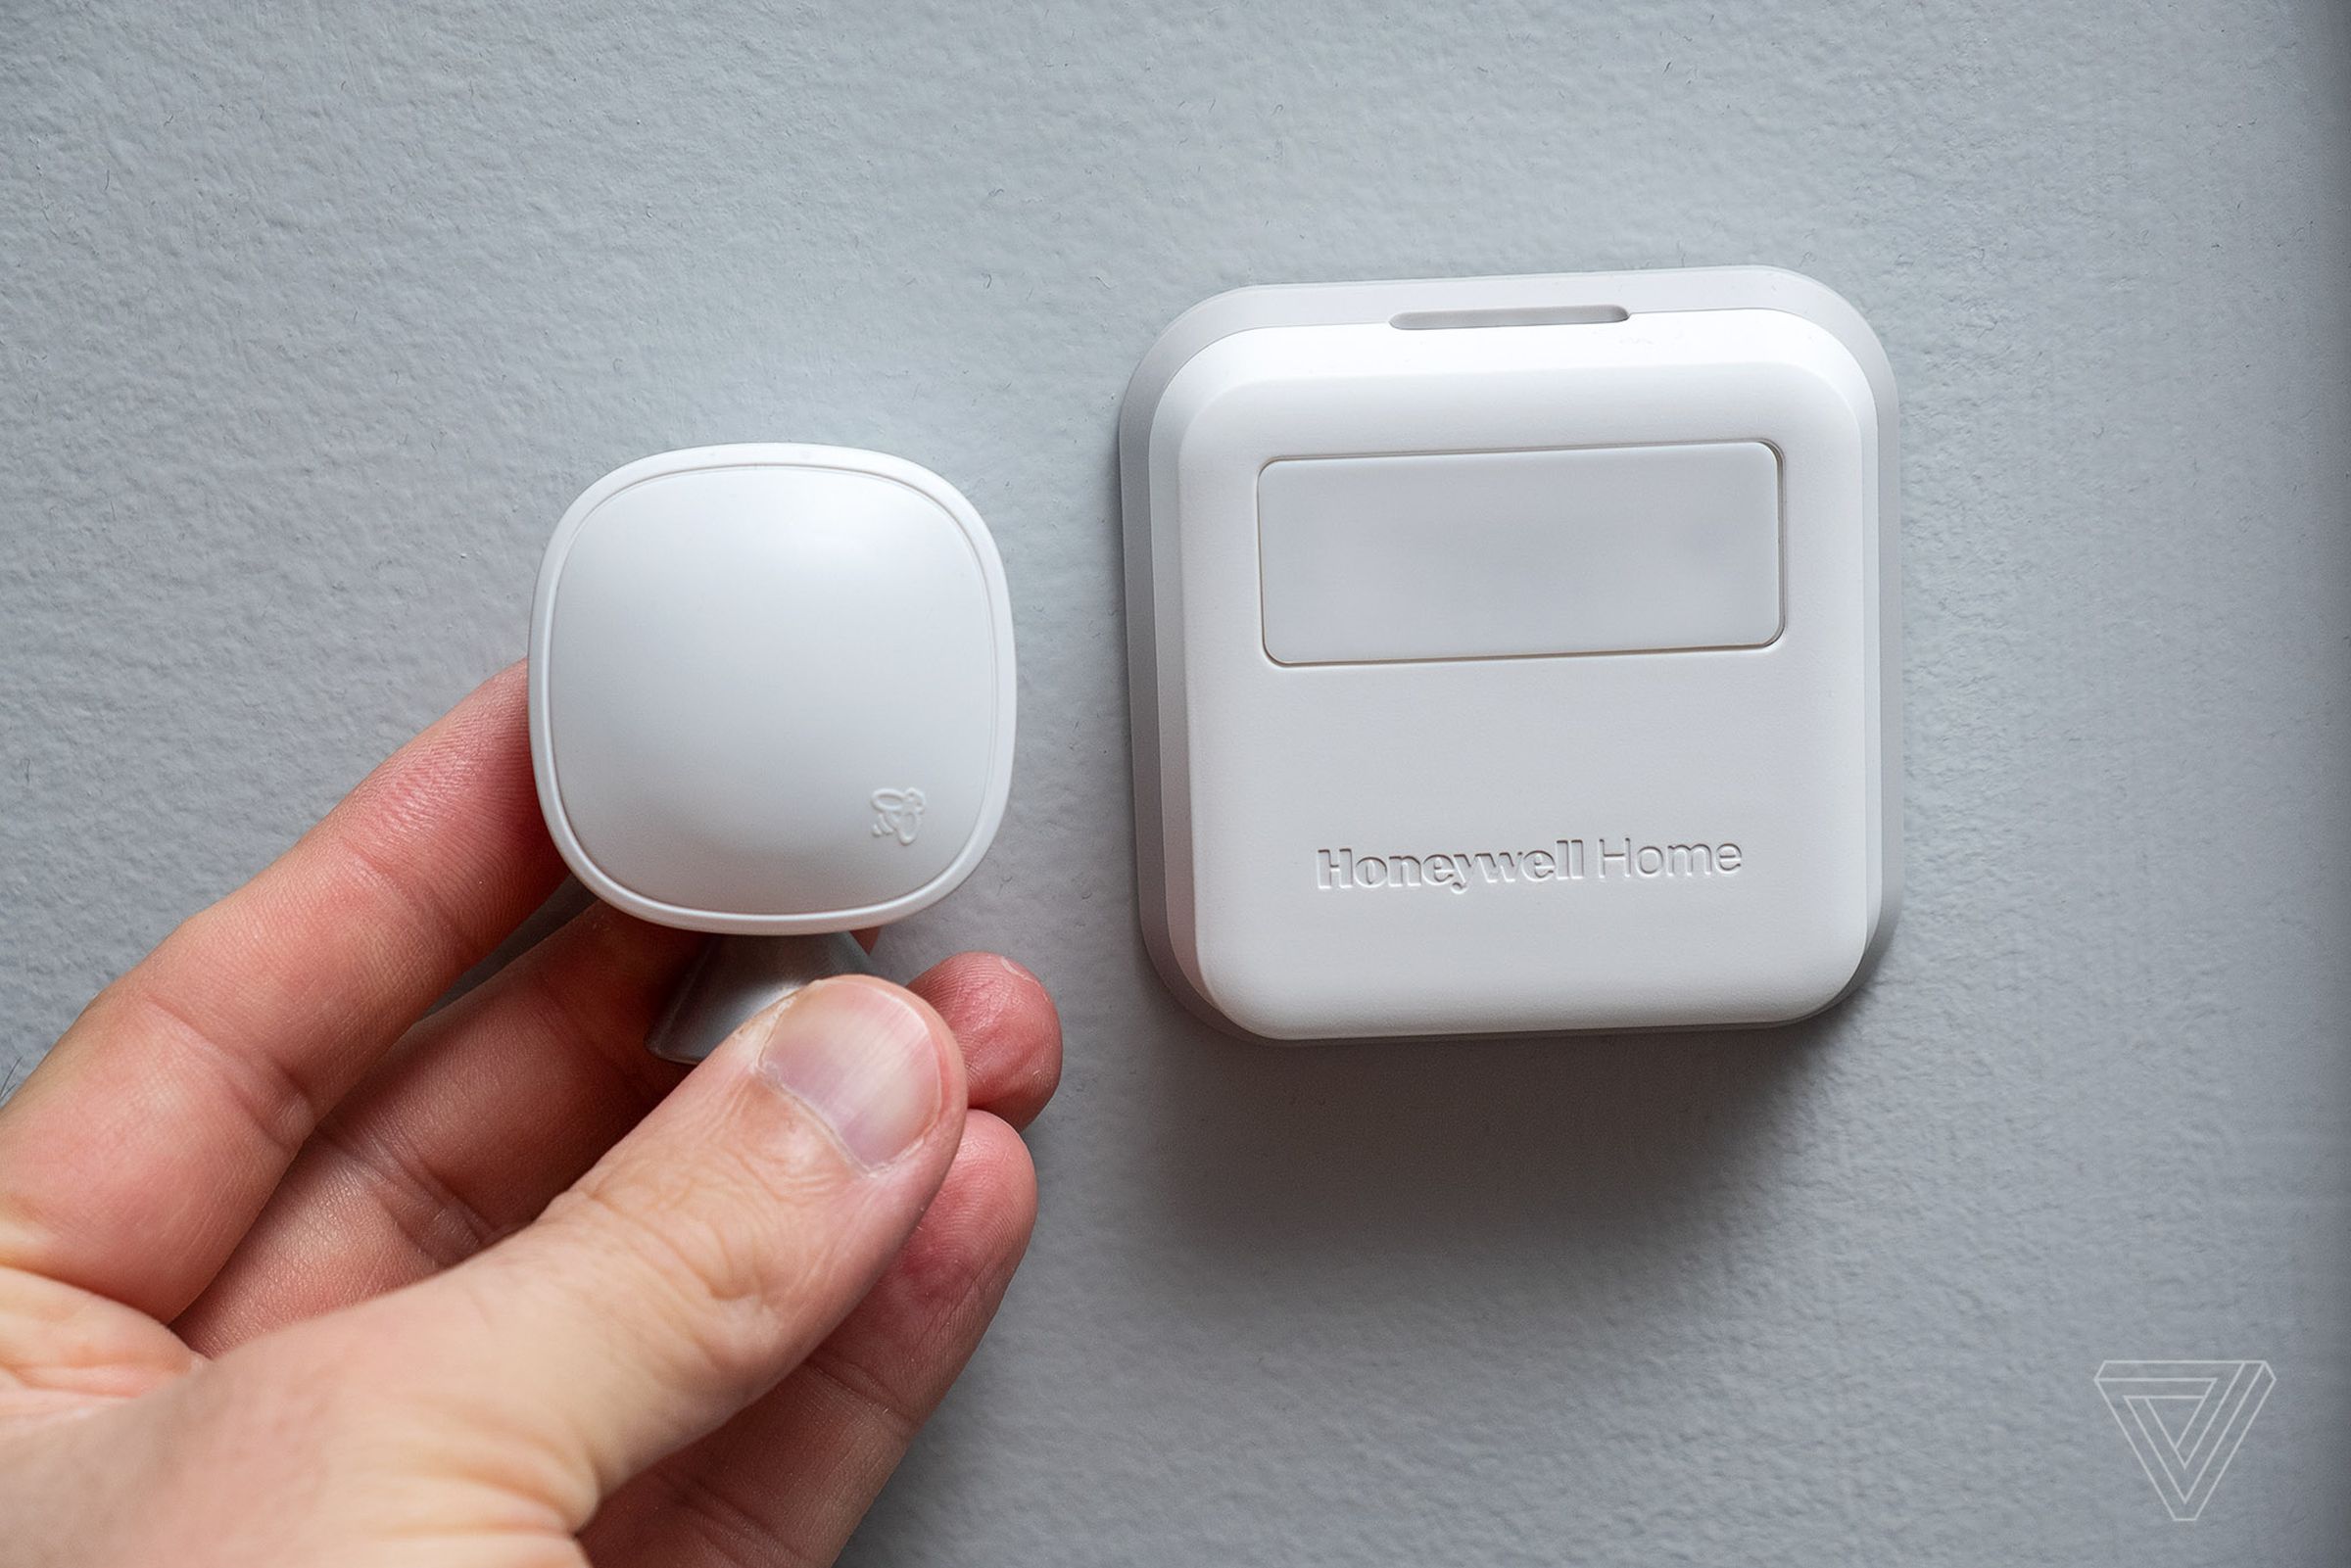 Ecobee remote sensor (left), T9 sensor (right). Unlike the Ecobee, the T9 sensor can read both temperature and humidity, and it runs on standard AAA batteries, but it’s much larger.